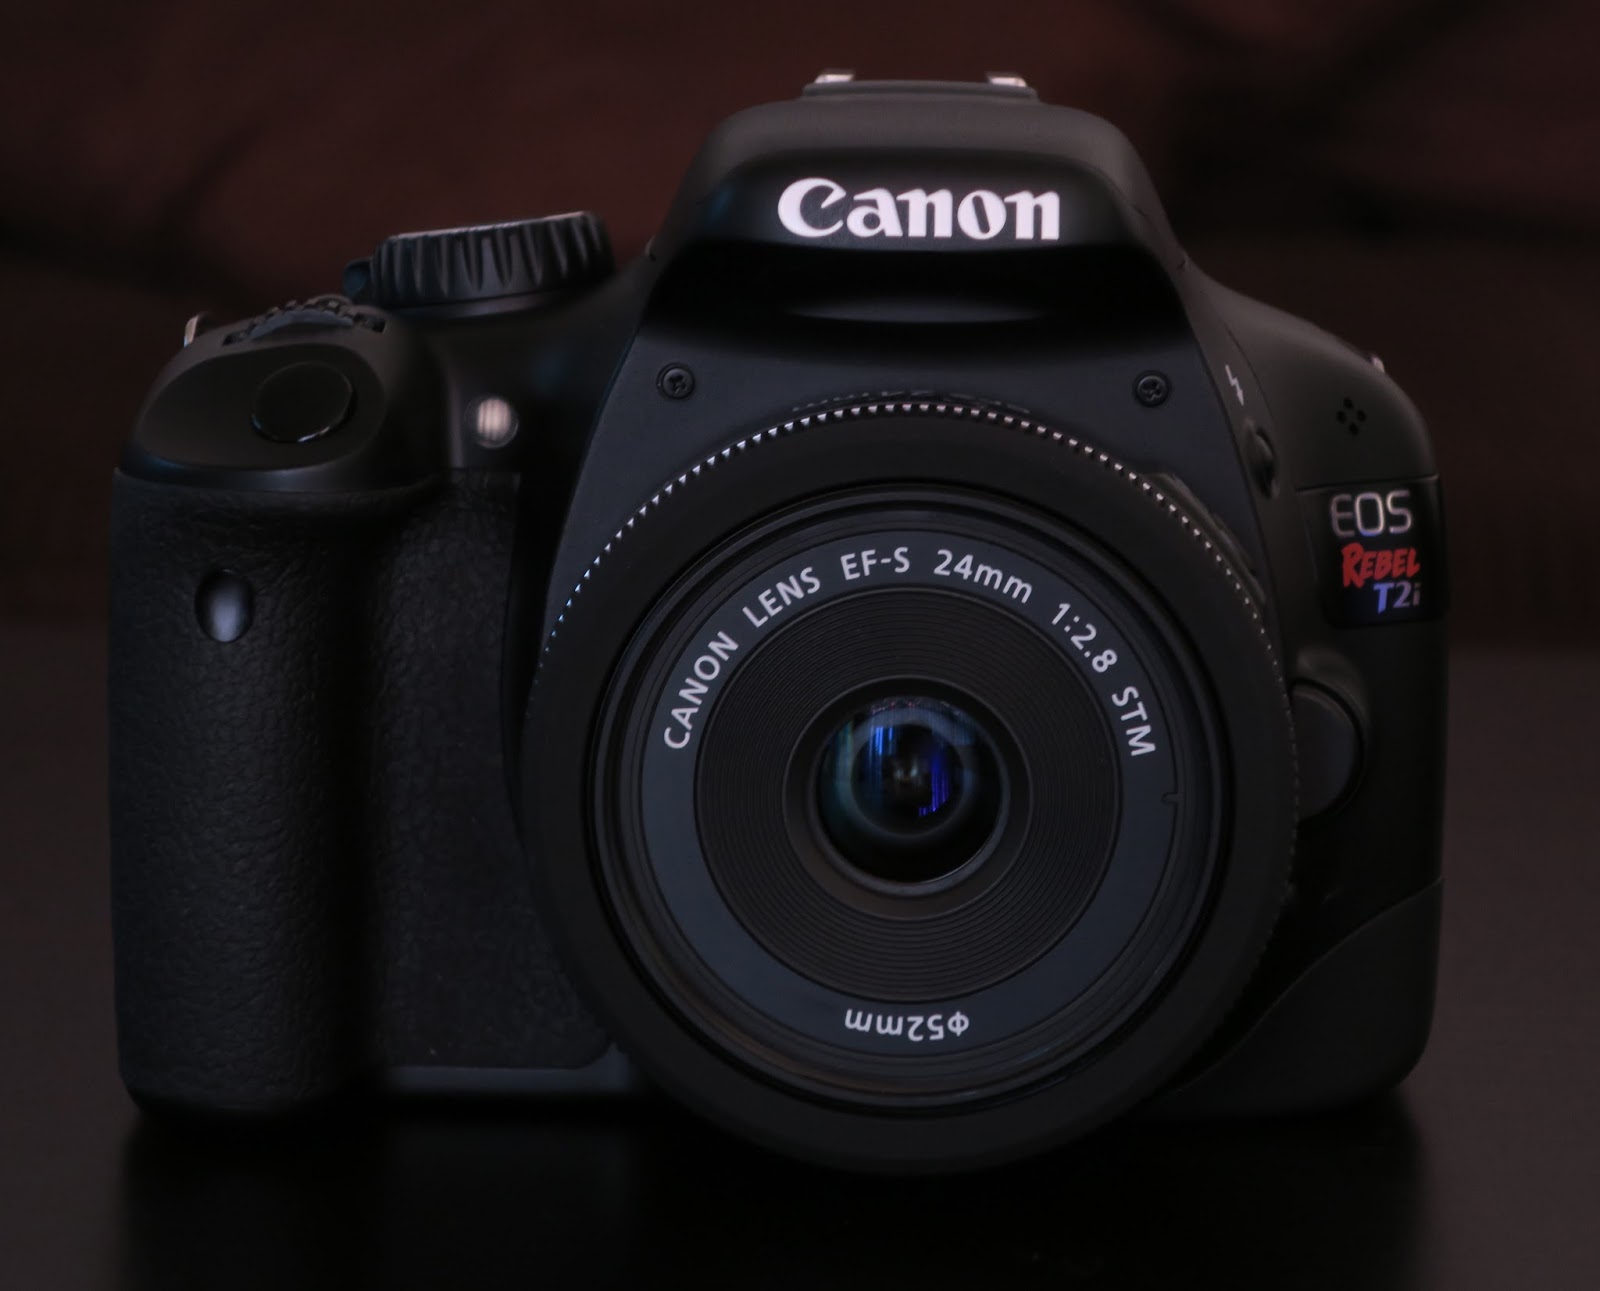 PHOTOGRAPHIC CENTRAL Canon  Rebel  EOS  T2i  550D Review A 